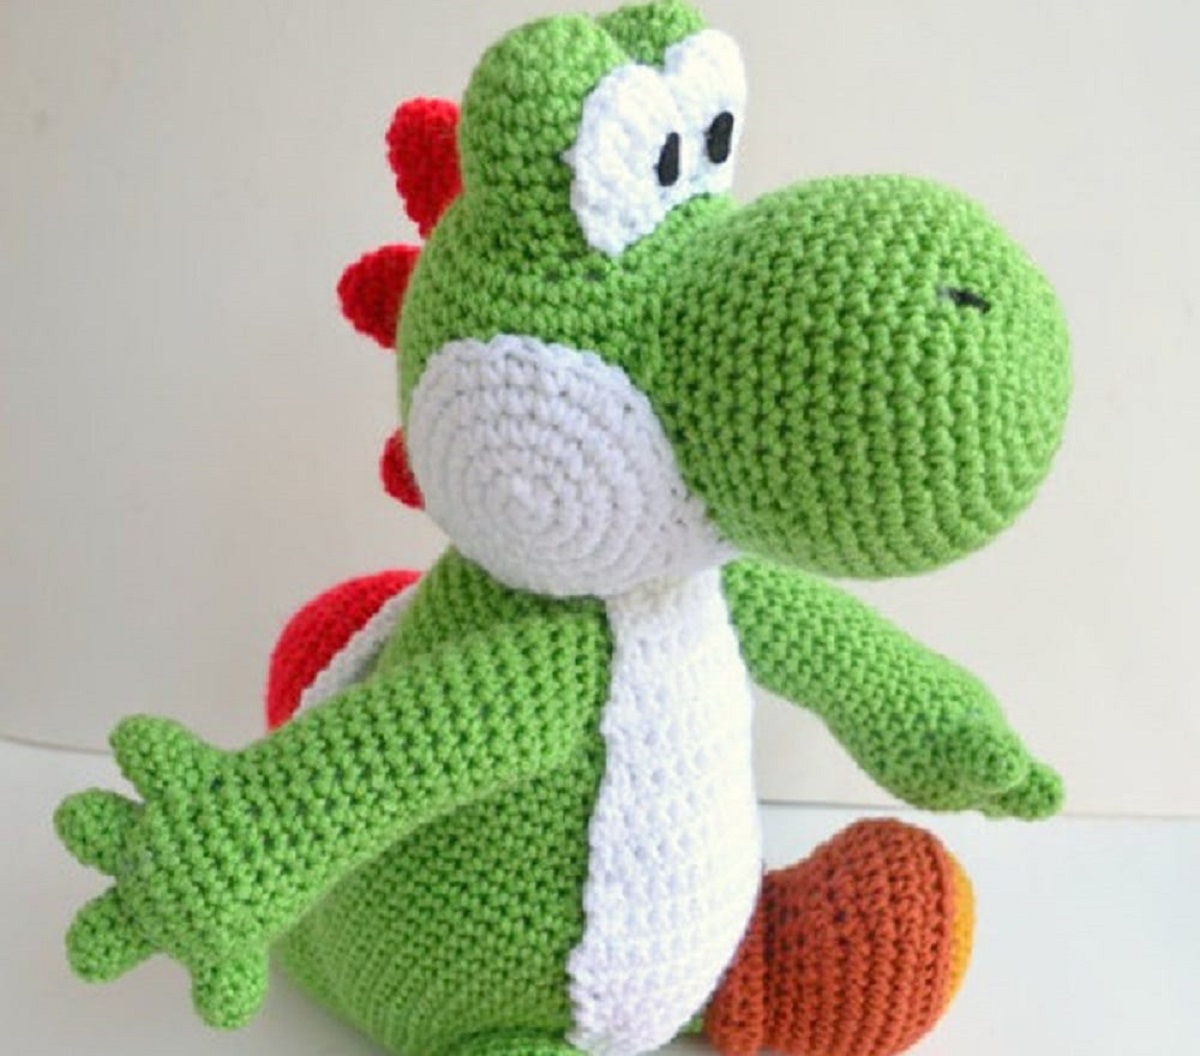 Crochet green and white Yoshi sitting sideways with one arm stretched behind him and red spikes running down his back.